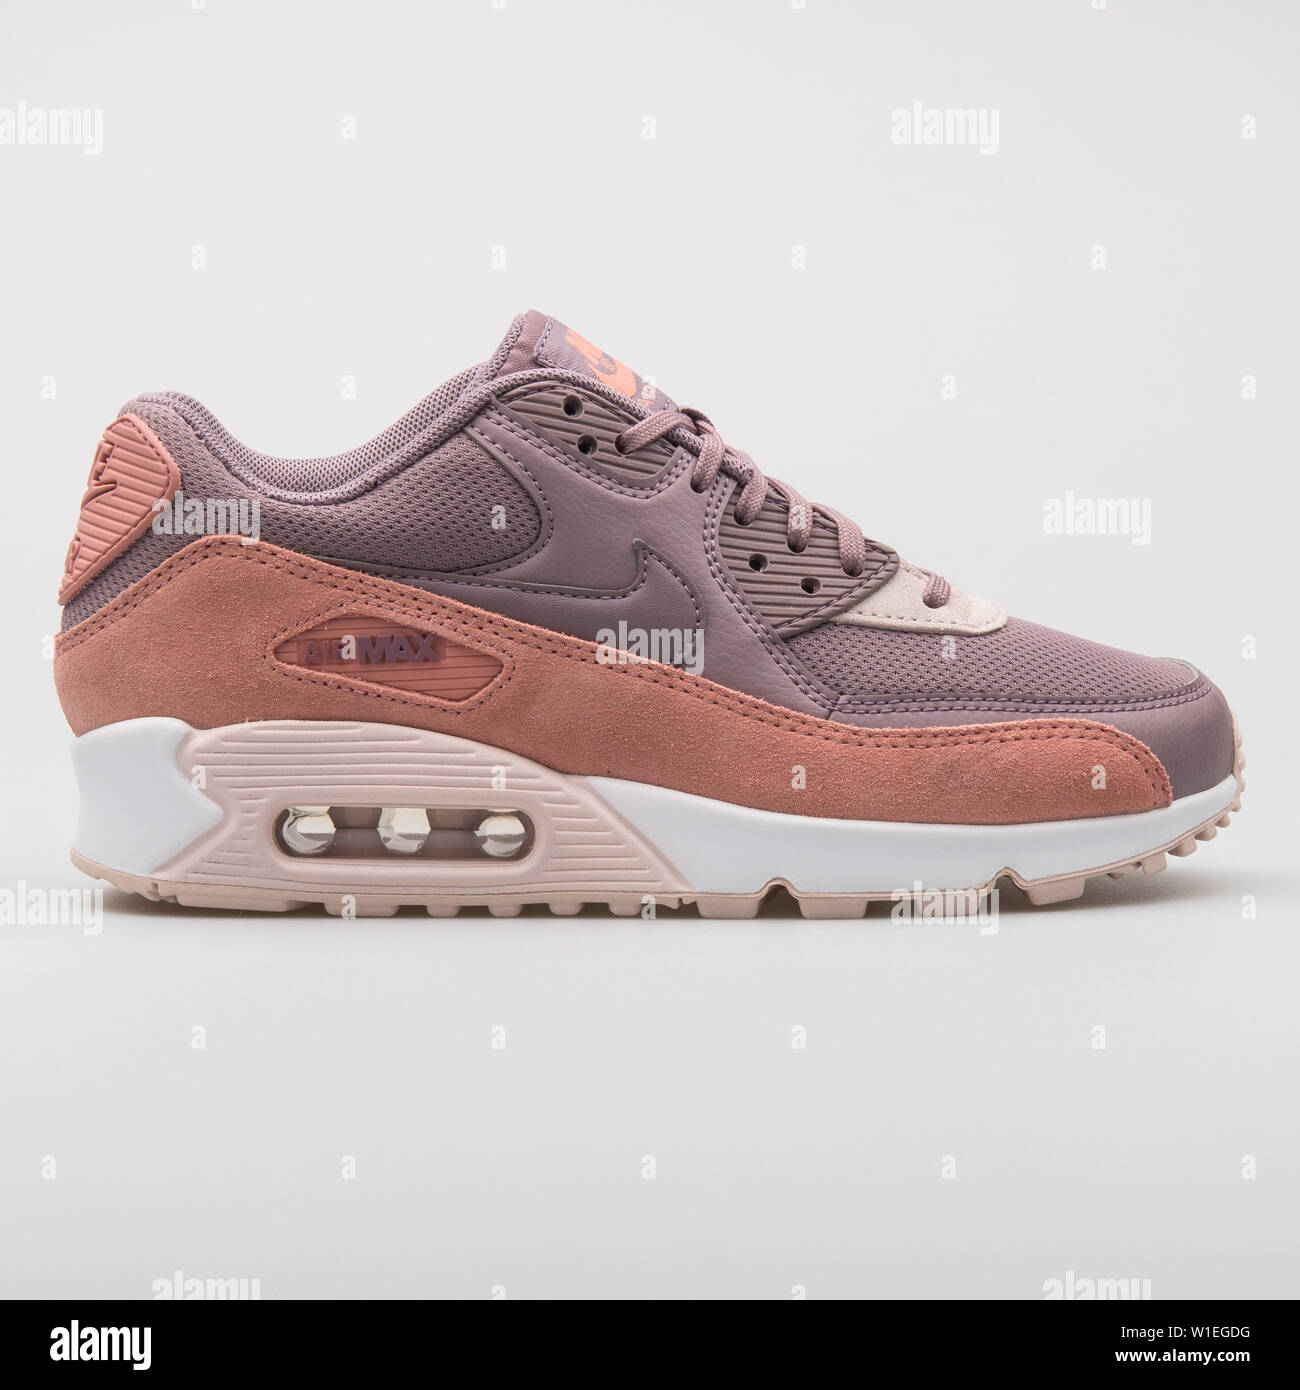 VIENNA, AUSTRIA - AUGUST 7, 2017: Nike Air Max 90 Premium purple and pink  sneaker on white background Stock Photo - Alamy